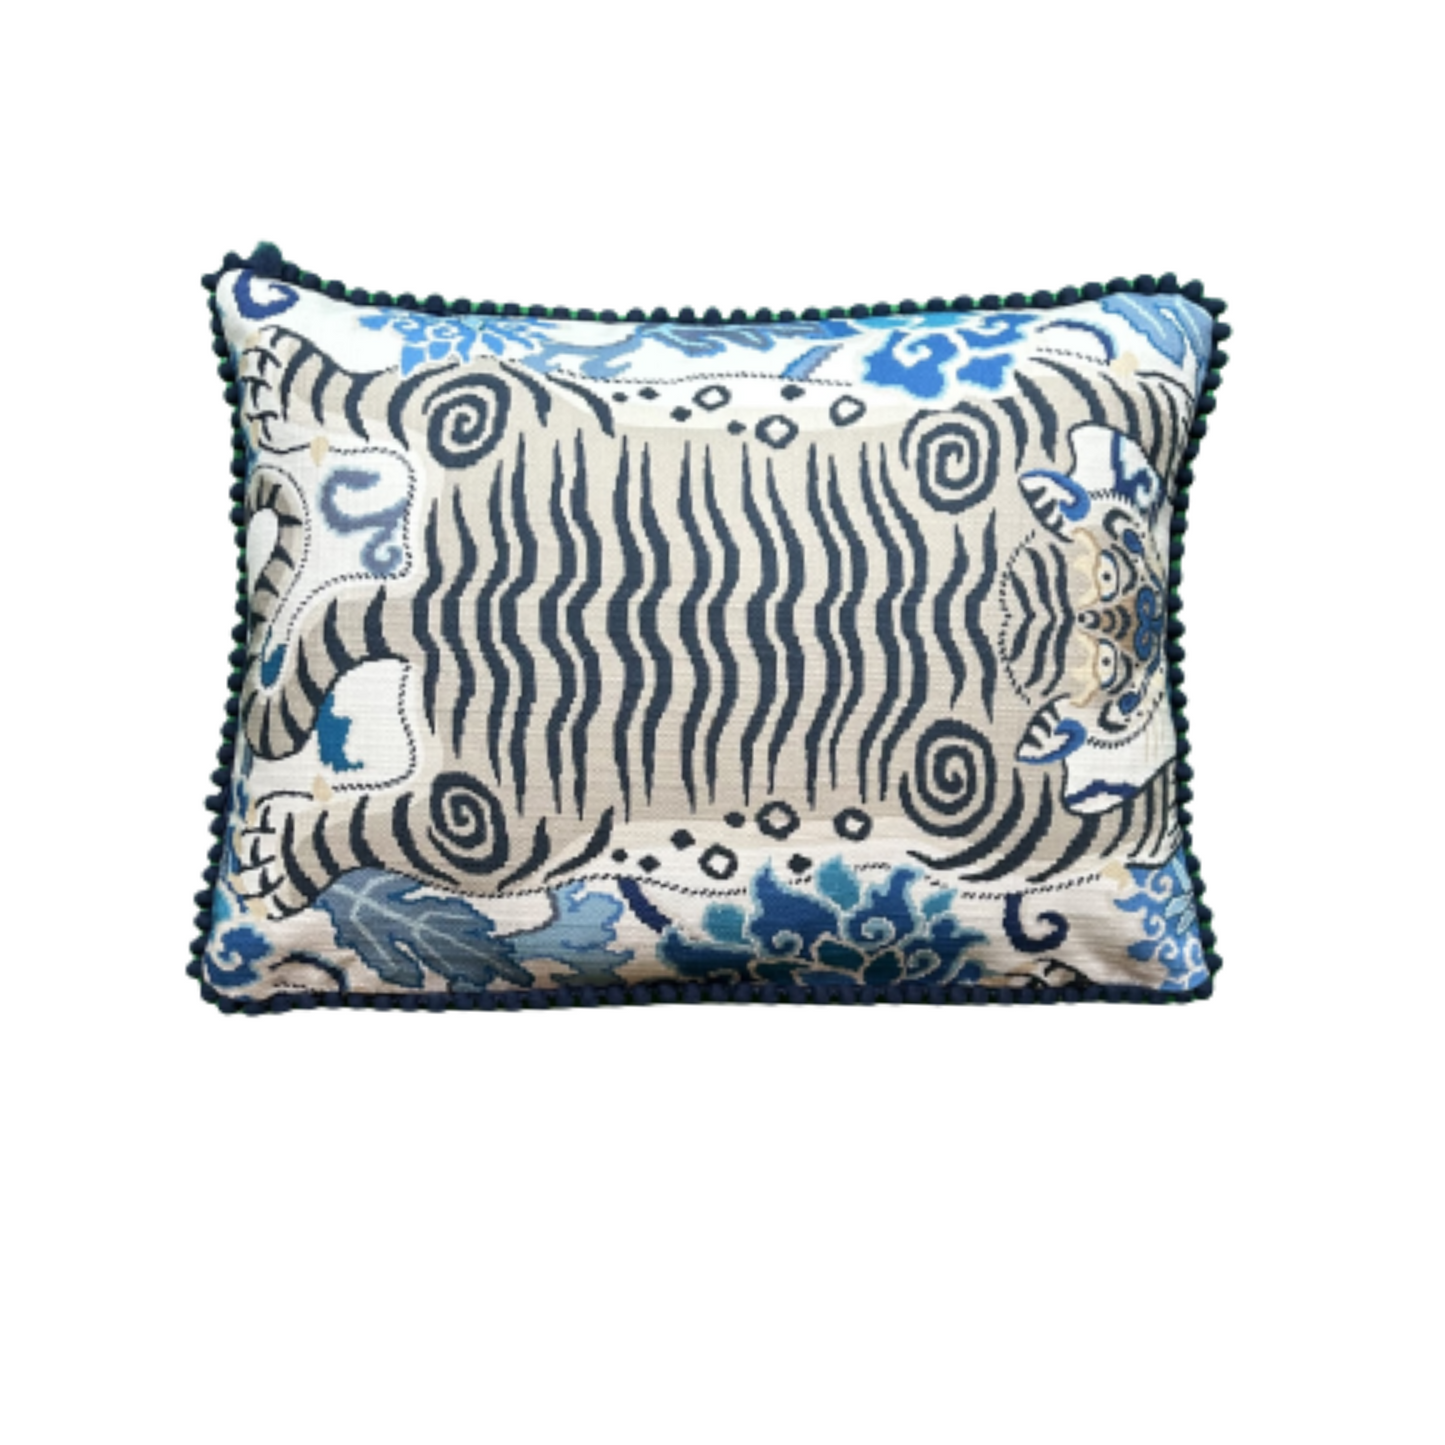 Blue Moon Tiger 16 x 22 Decorative Throw Pillow with Down Feather Insert